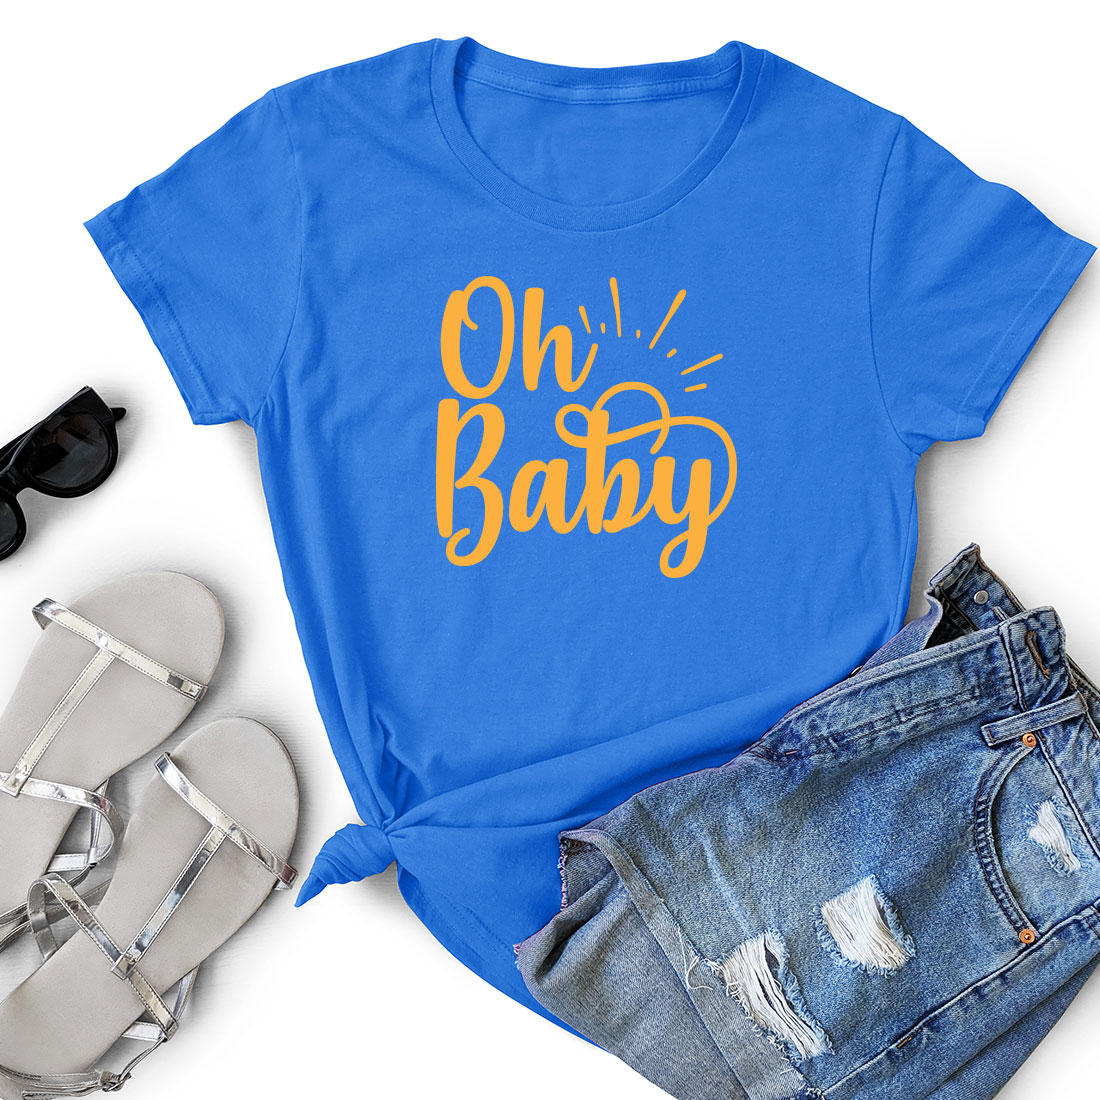 T - shirt that says oh baby next to a pair of shorts.